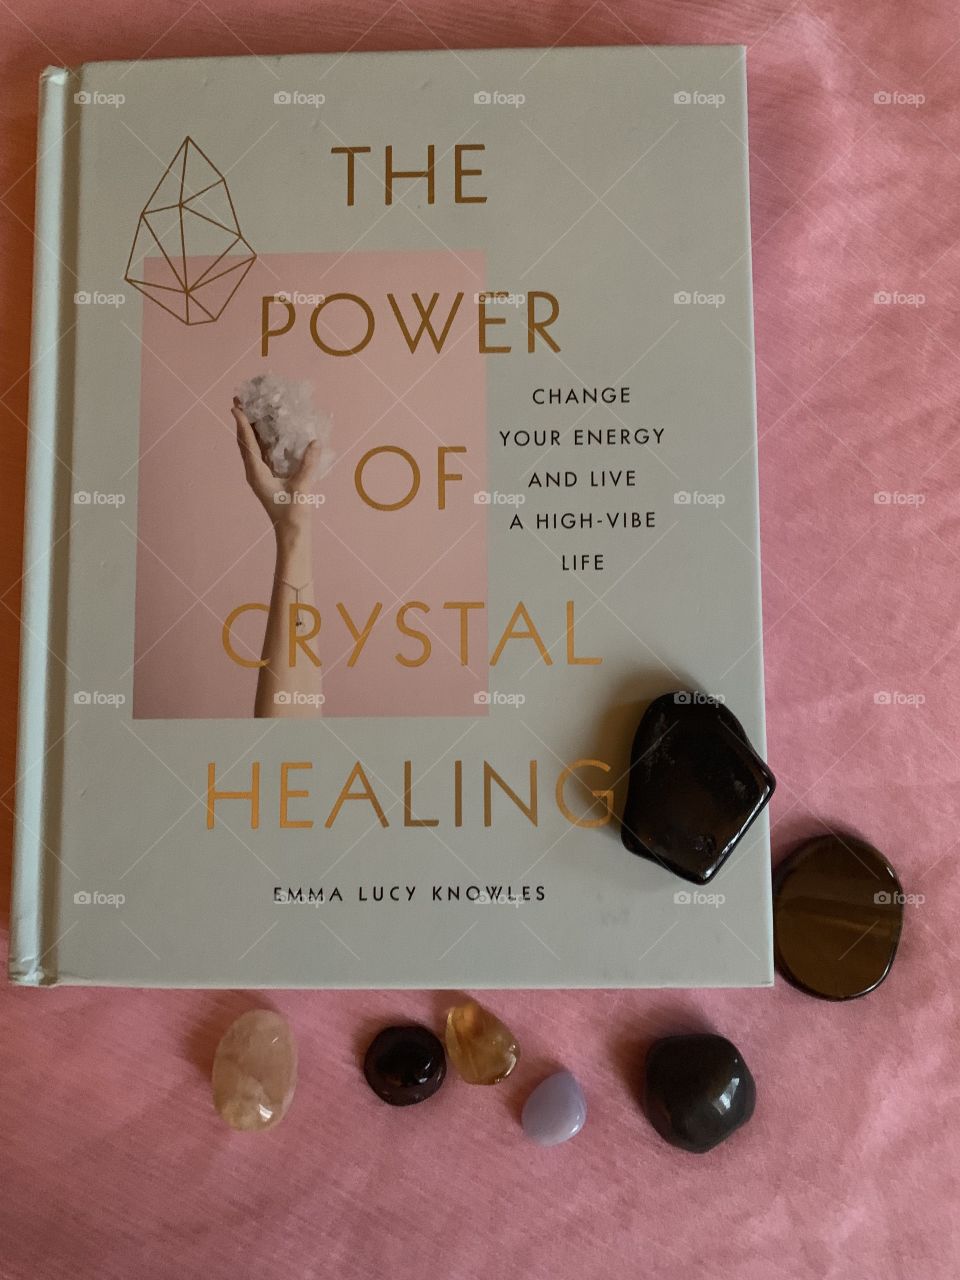 The power of crystal healing 